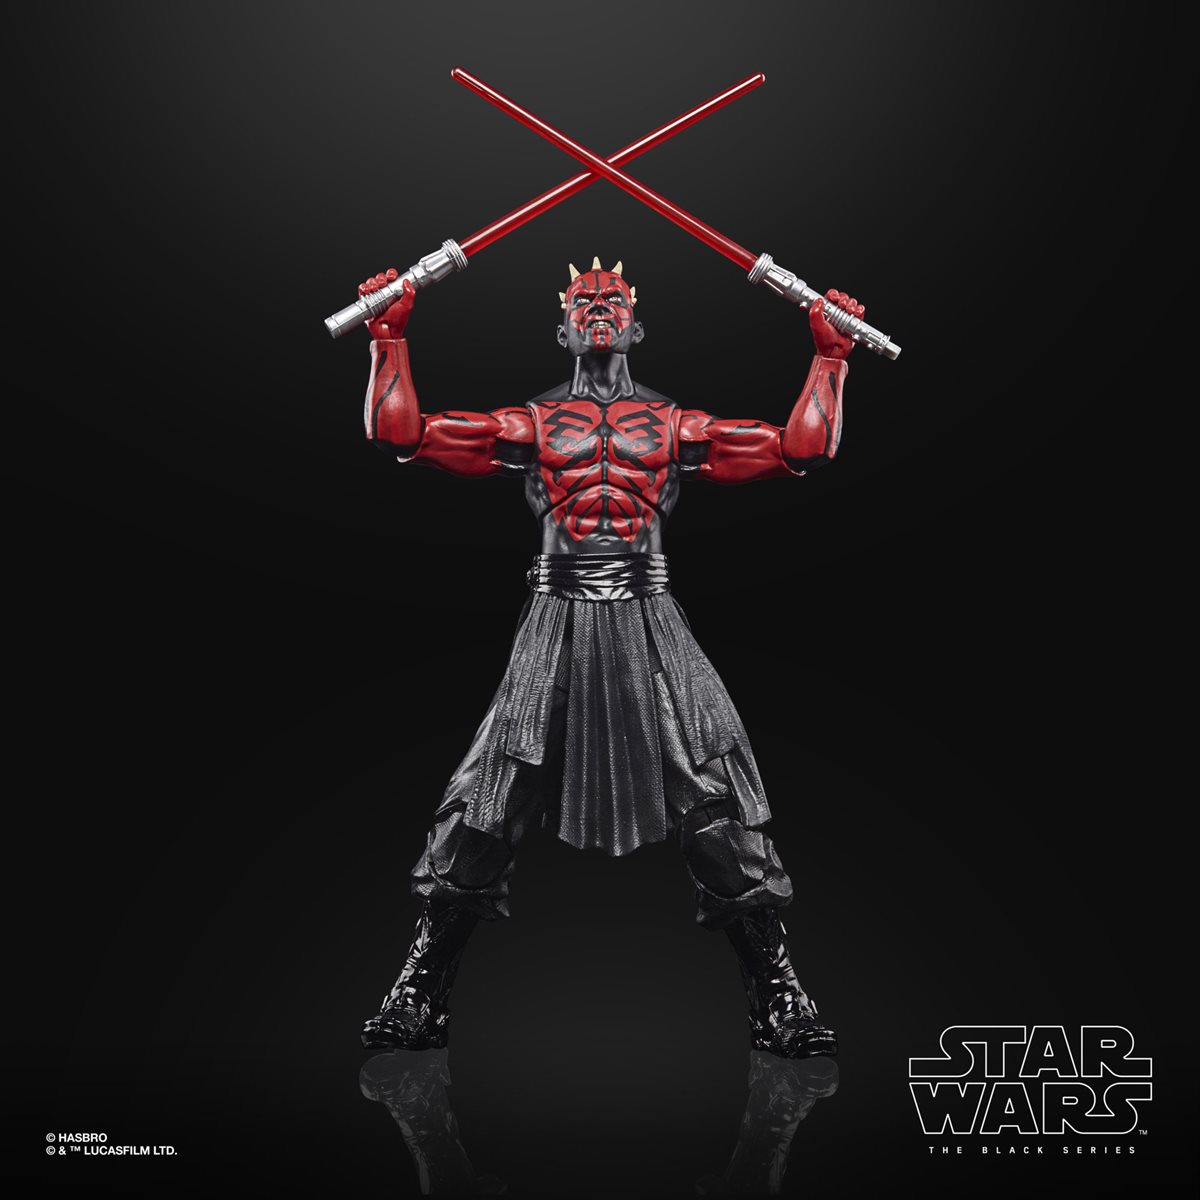 Hasbro Star Wars The Black Series Darth Maul Action Figure for sale online